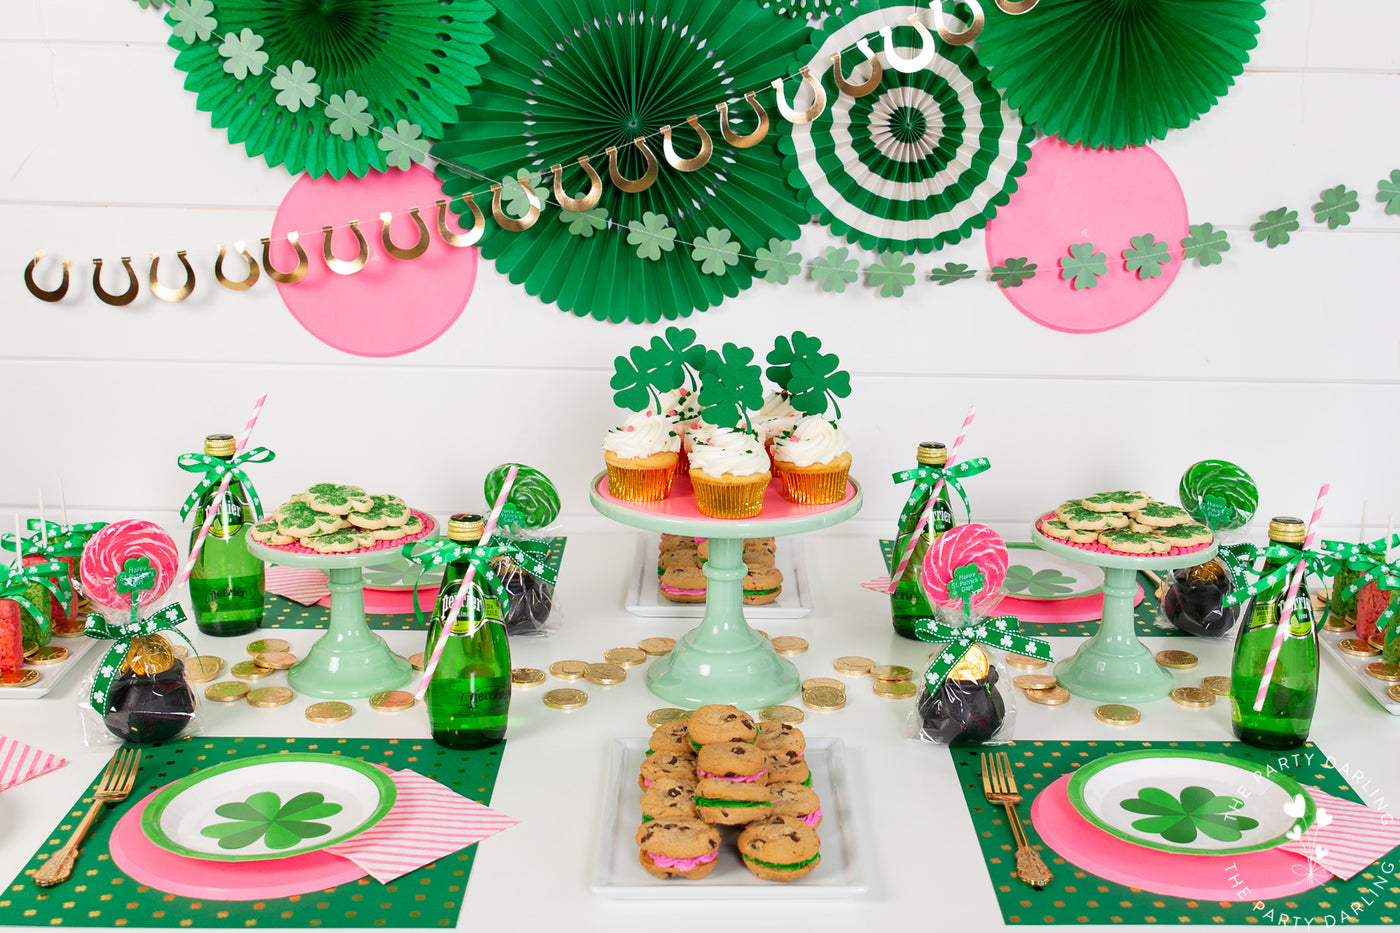 Pink & Green St. Patrick's Day Party Ideas - The Party Darling